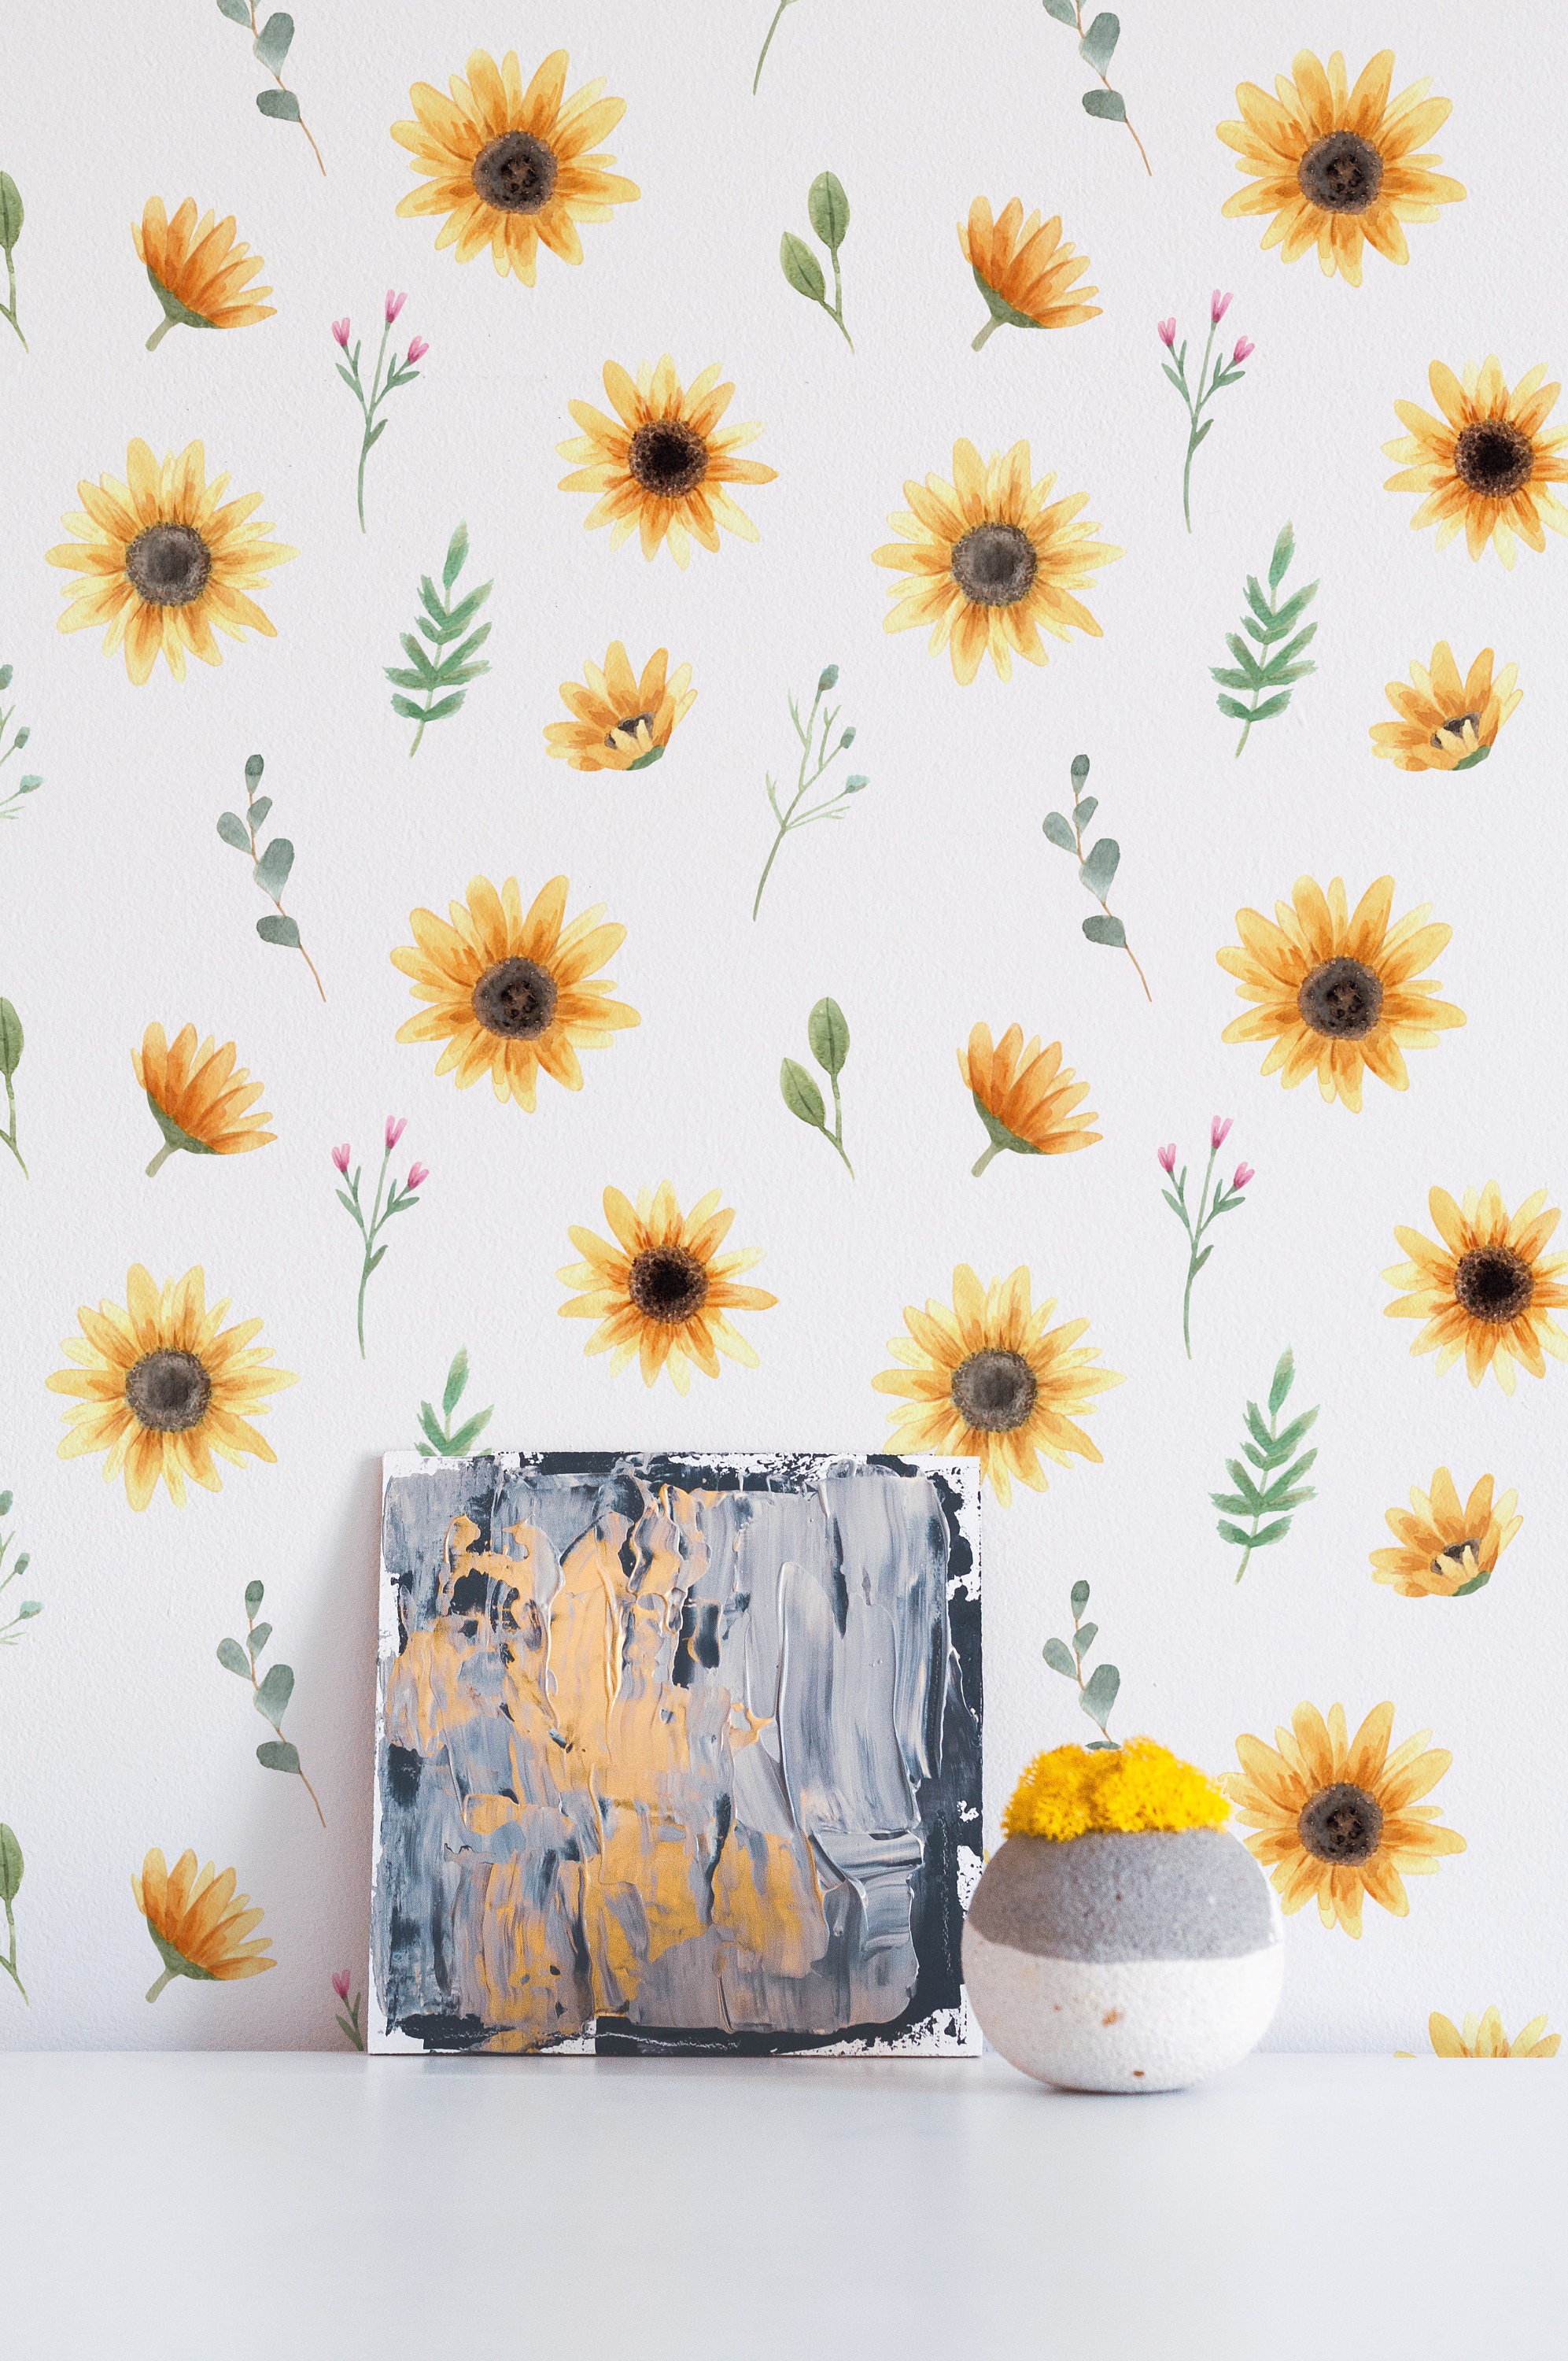 Sunflower Wallpaper. Bright and Colorful. Peel and Stick | Etsy